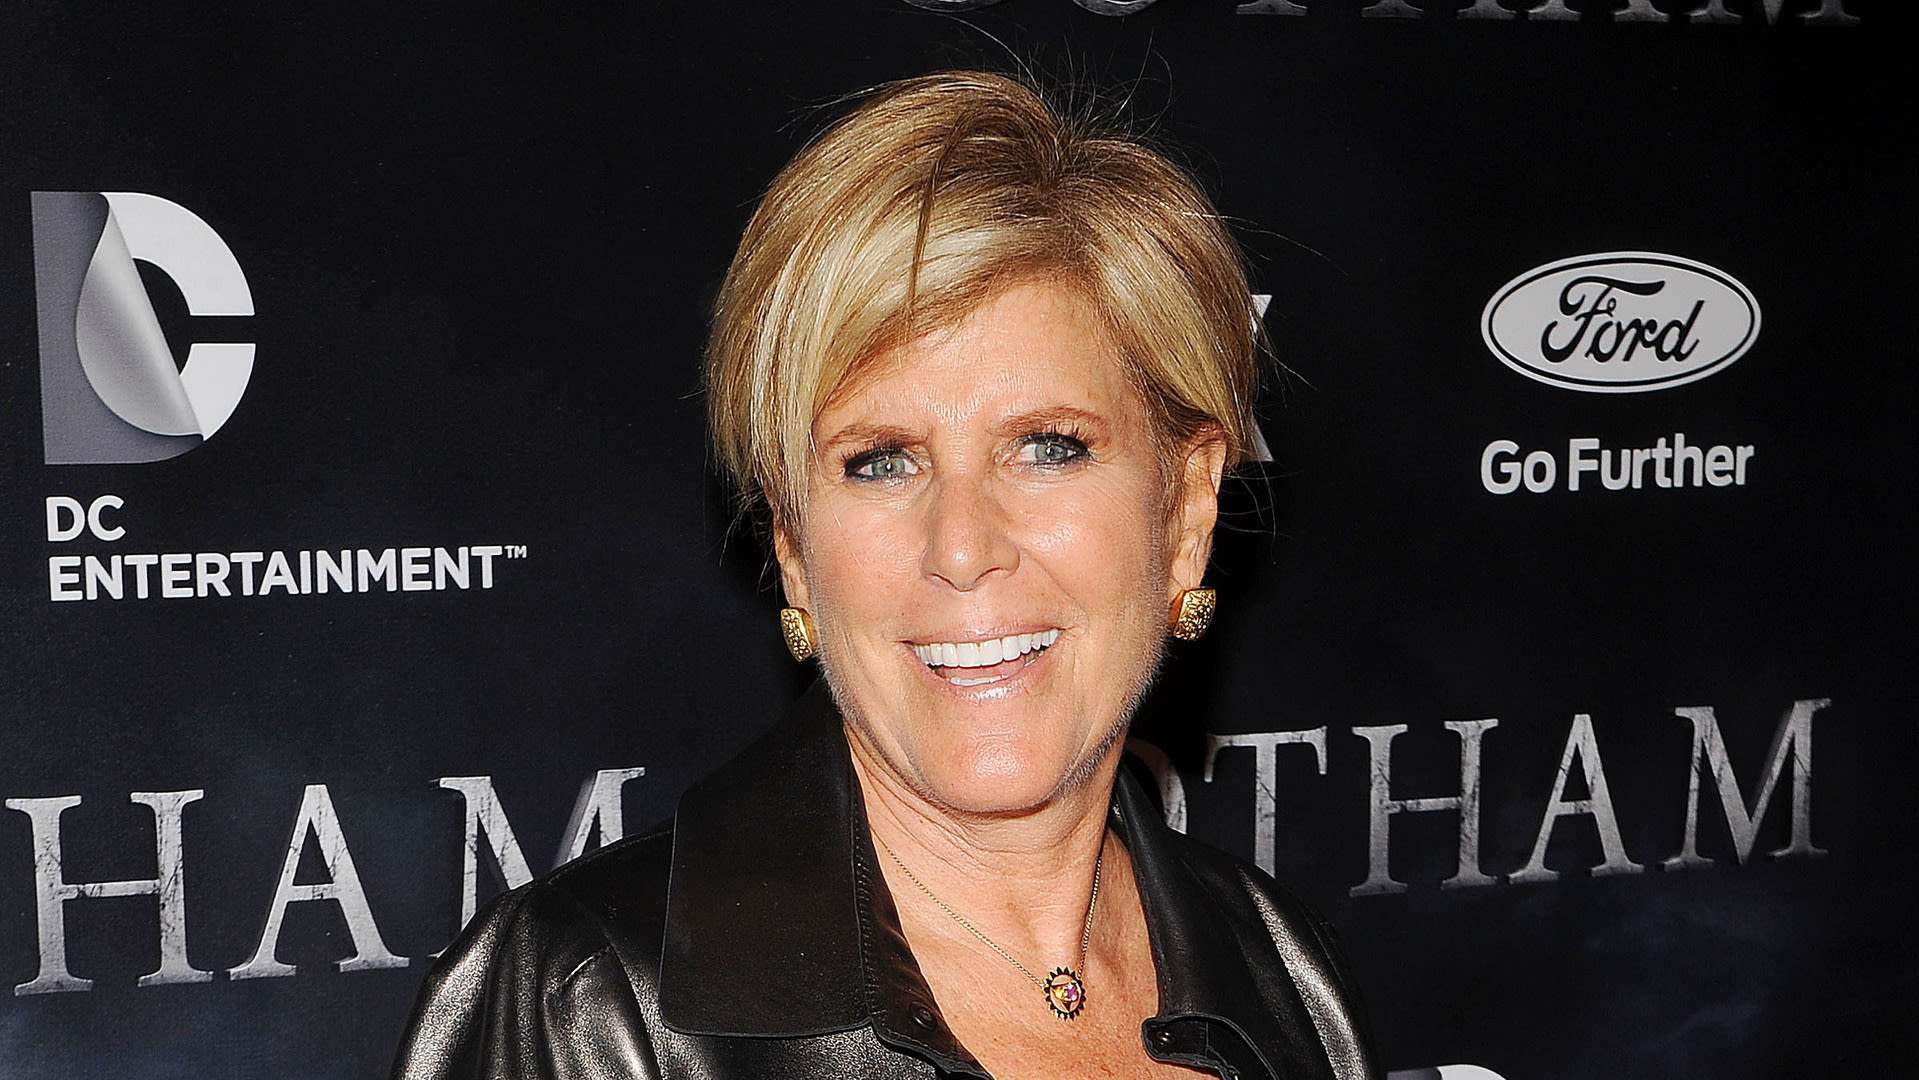 Suze Orman: 4 Key Signs You Should Buy a Home Now, Despite High Mortgage Rates